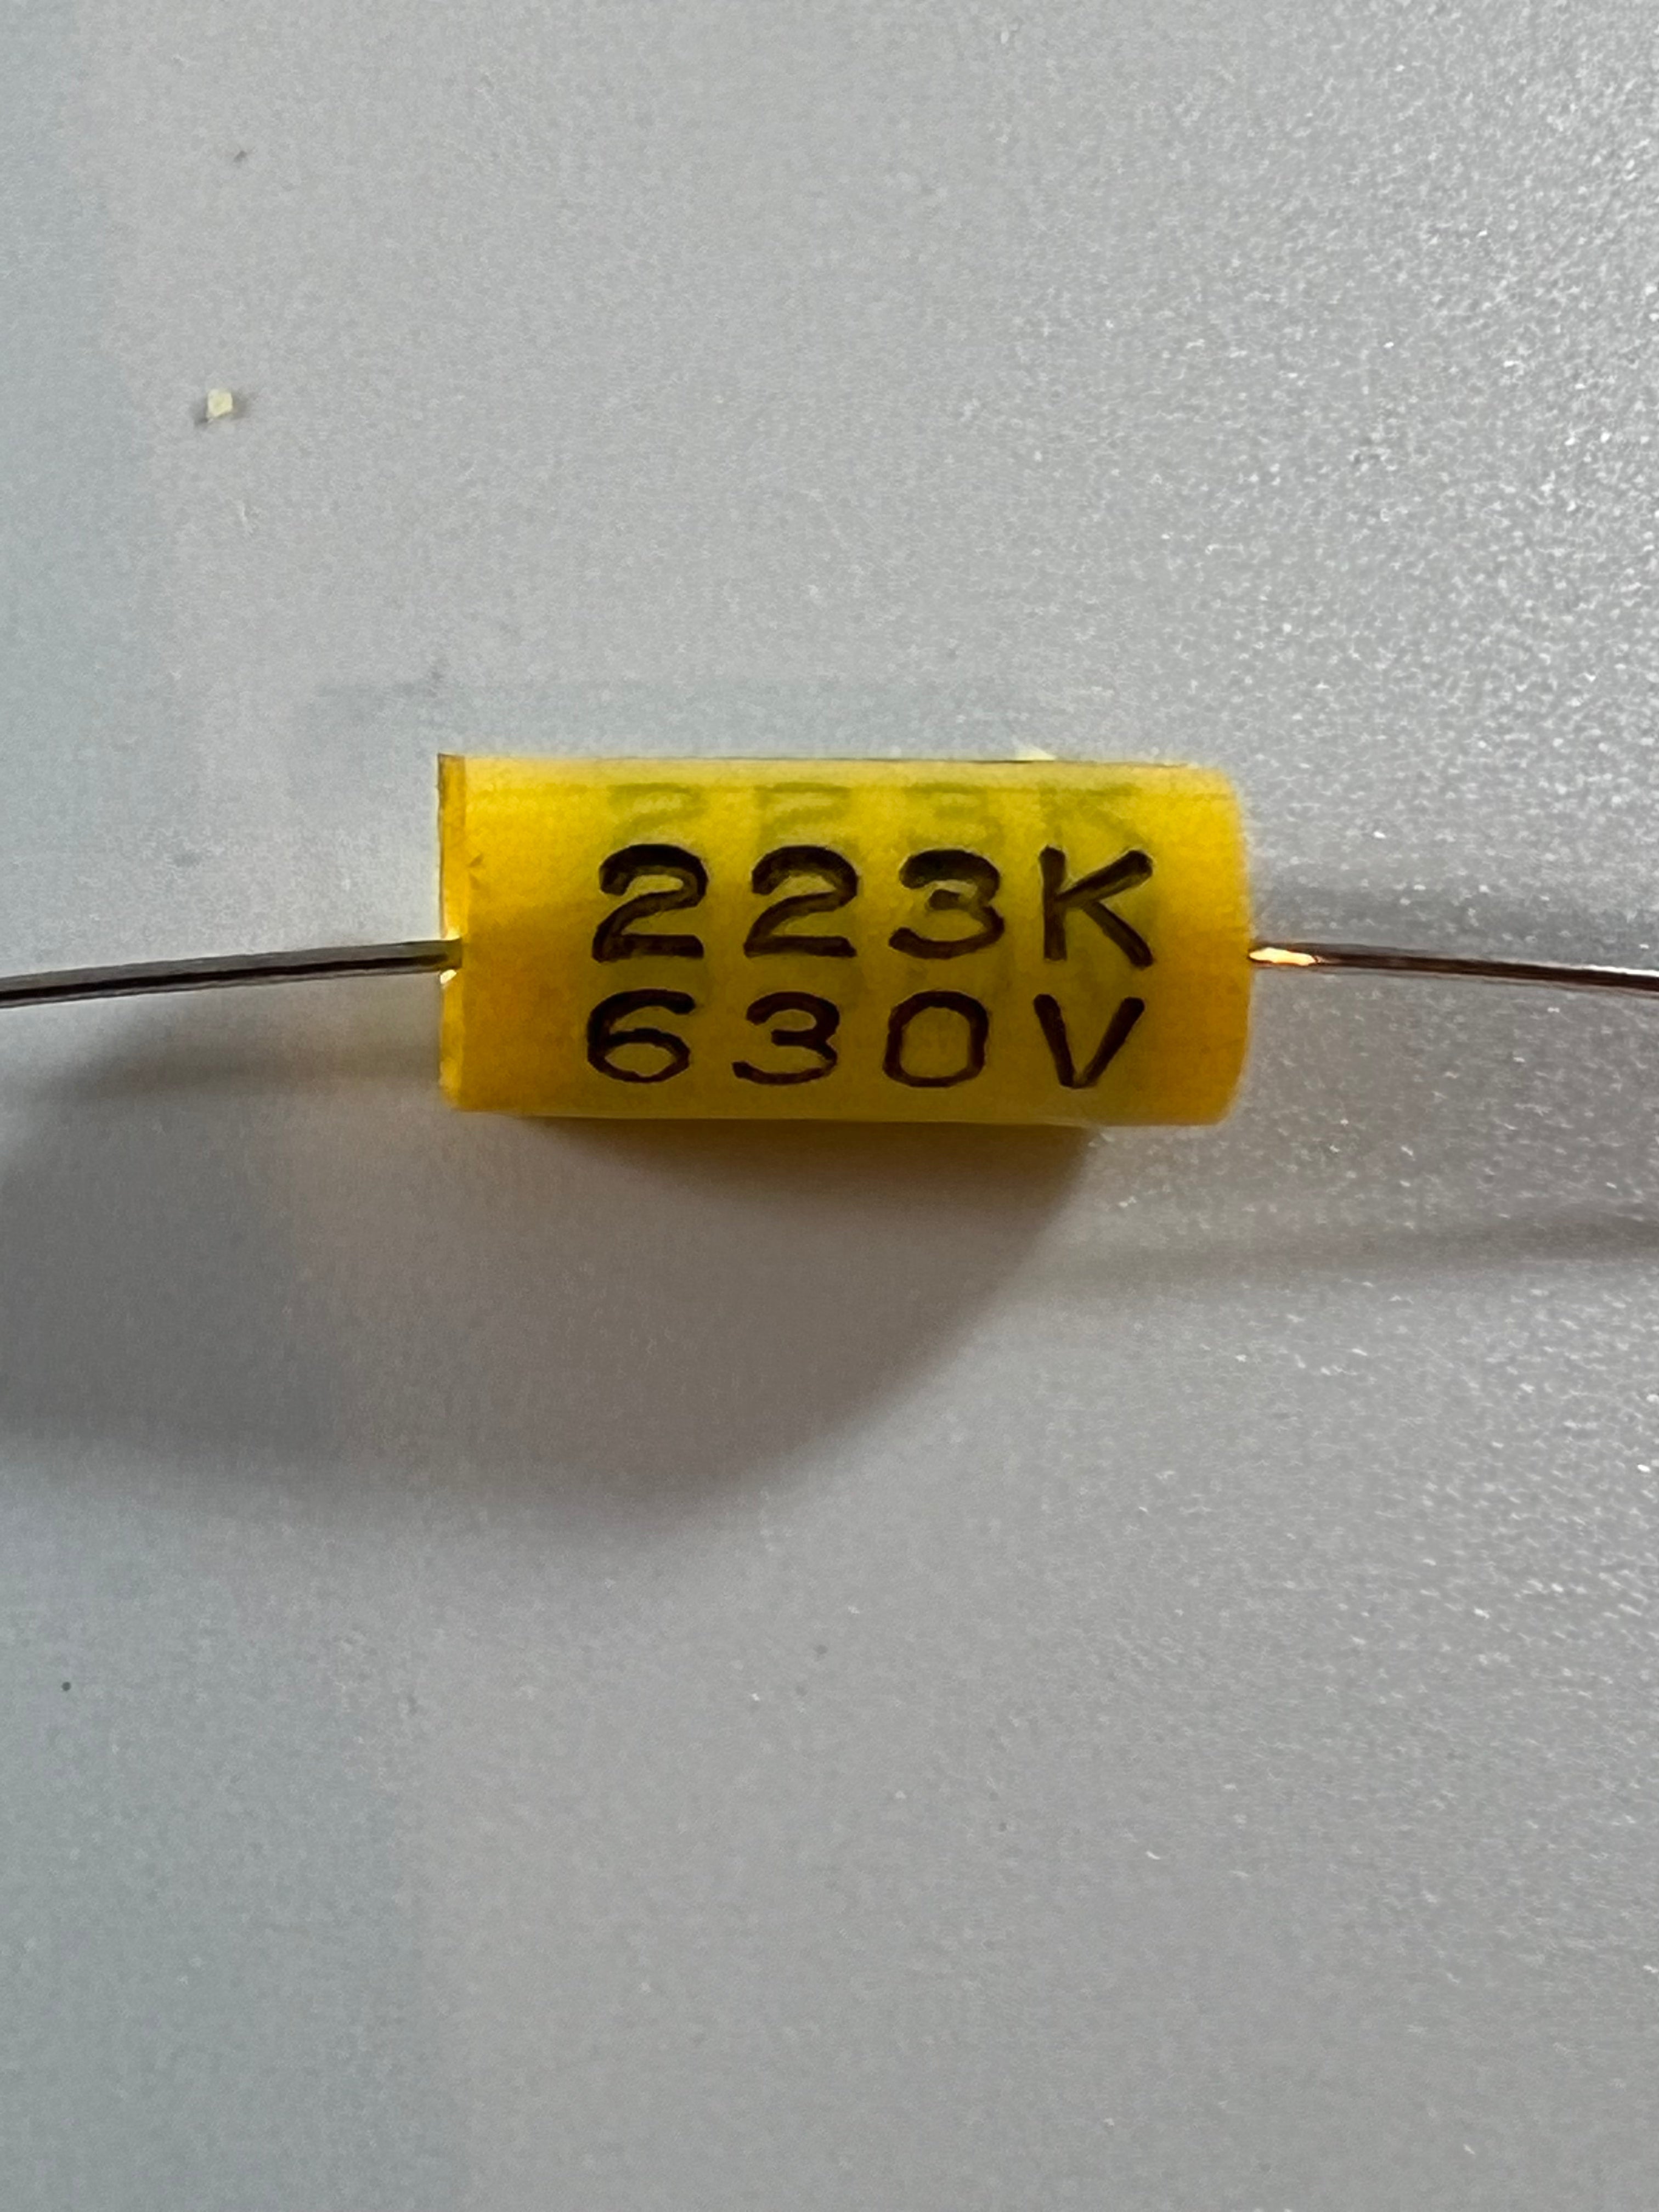 Capacitor - Axial Lead Electrolytic, 10 µF @ 500 VDC, F&T – Amp Parts Direct